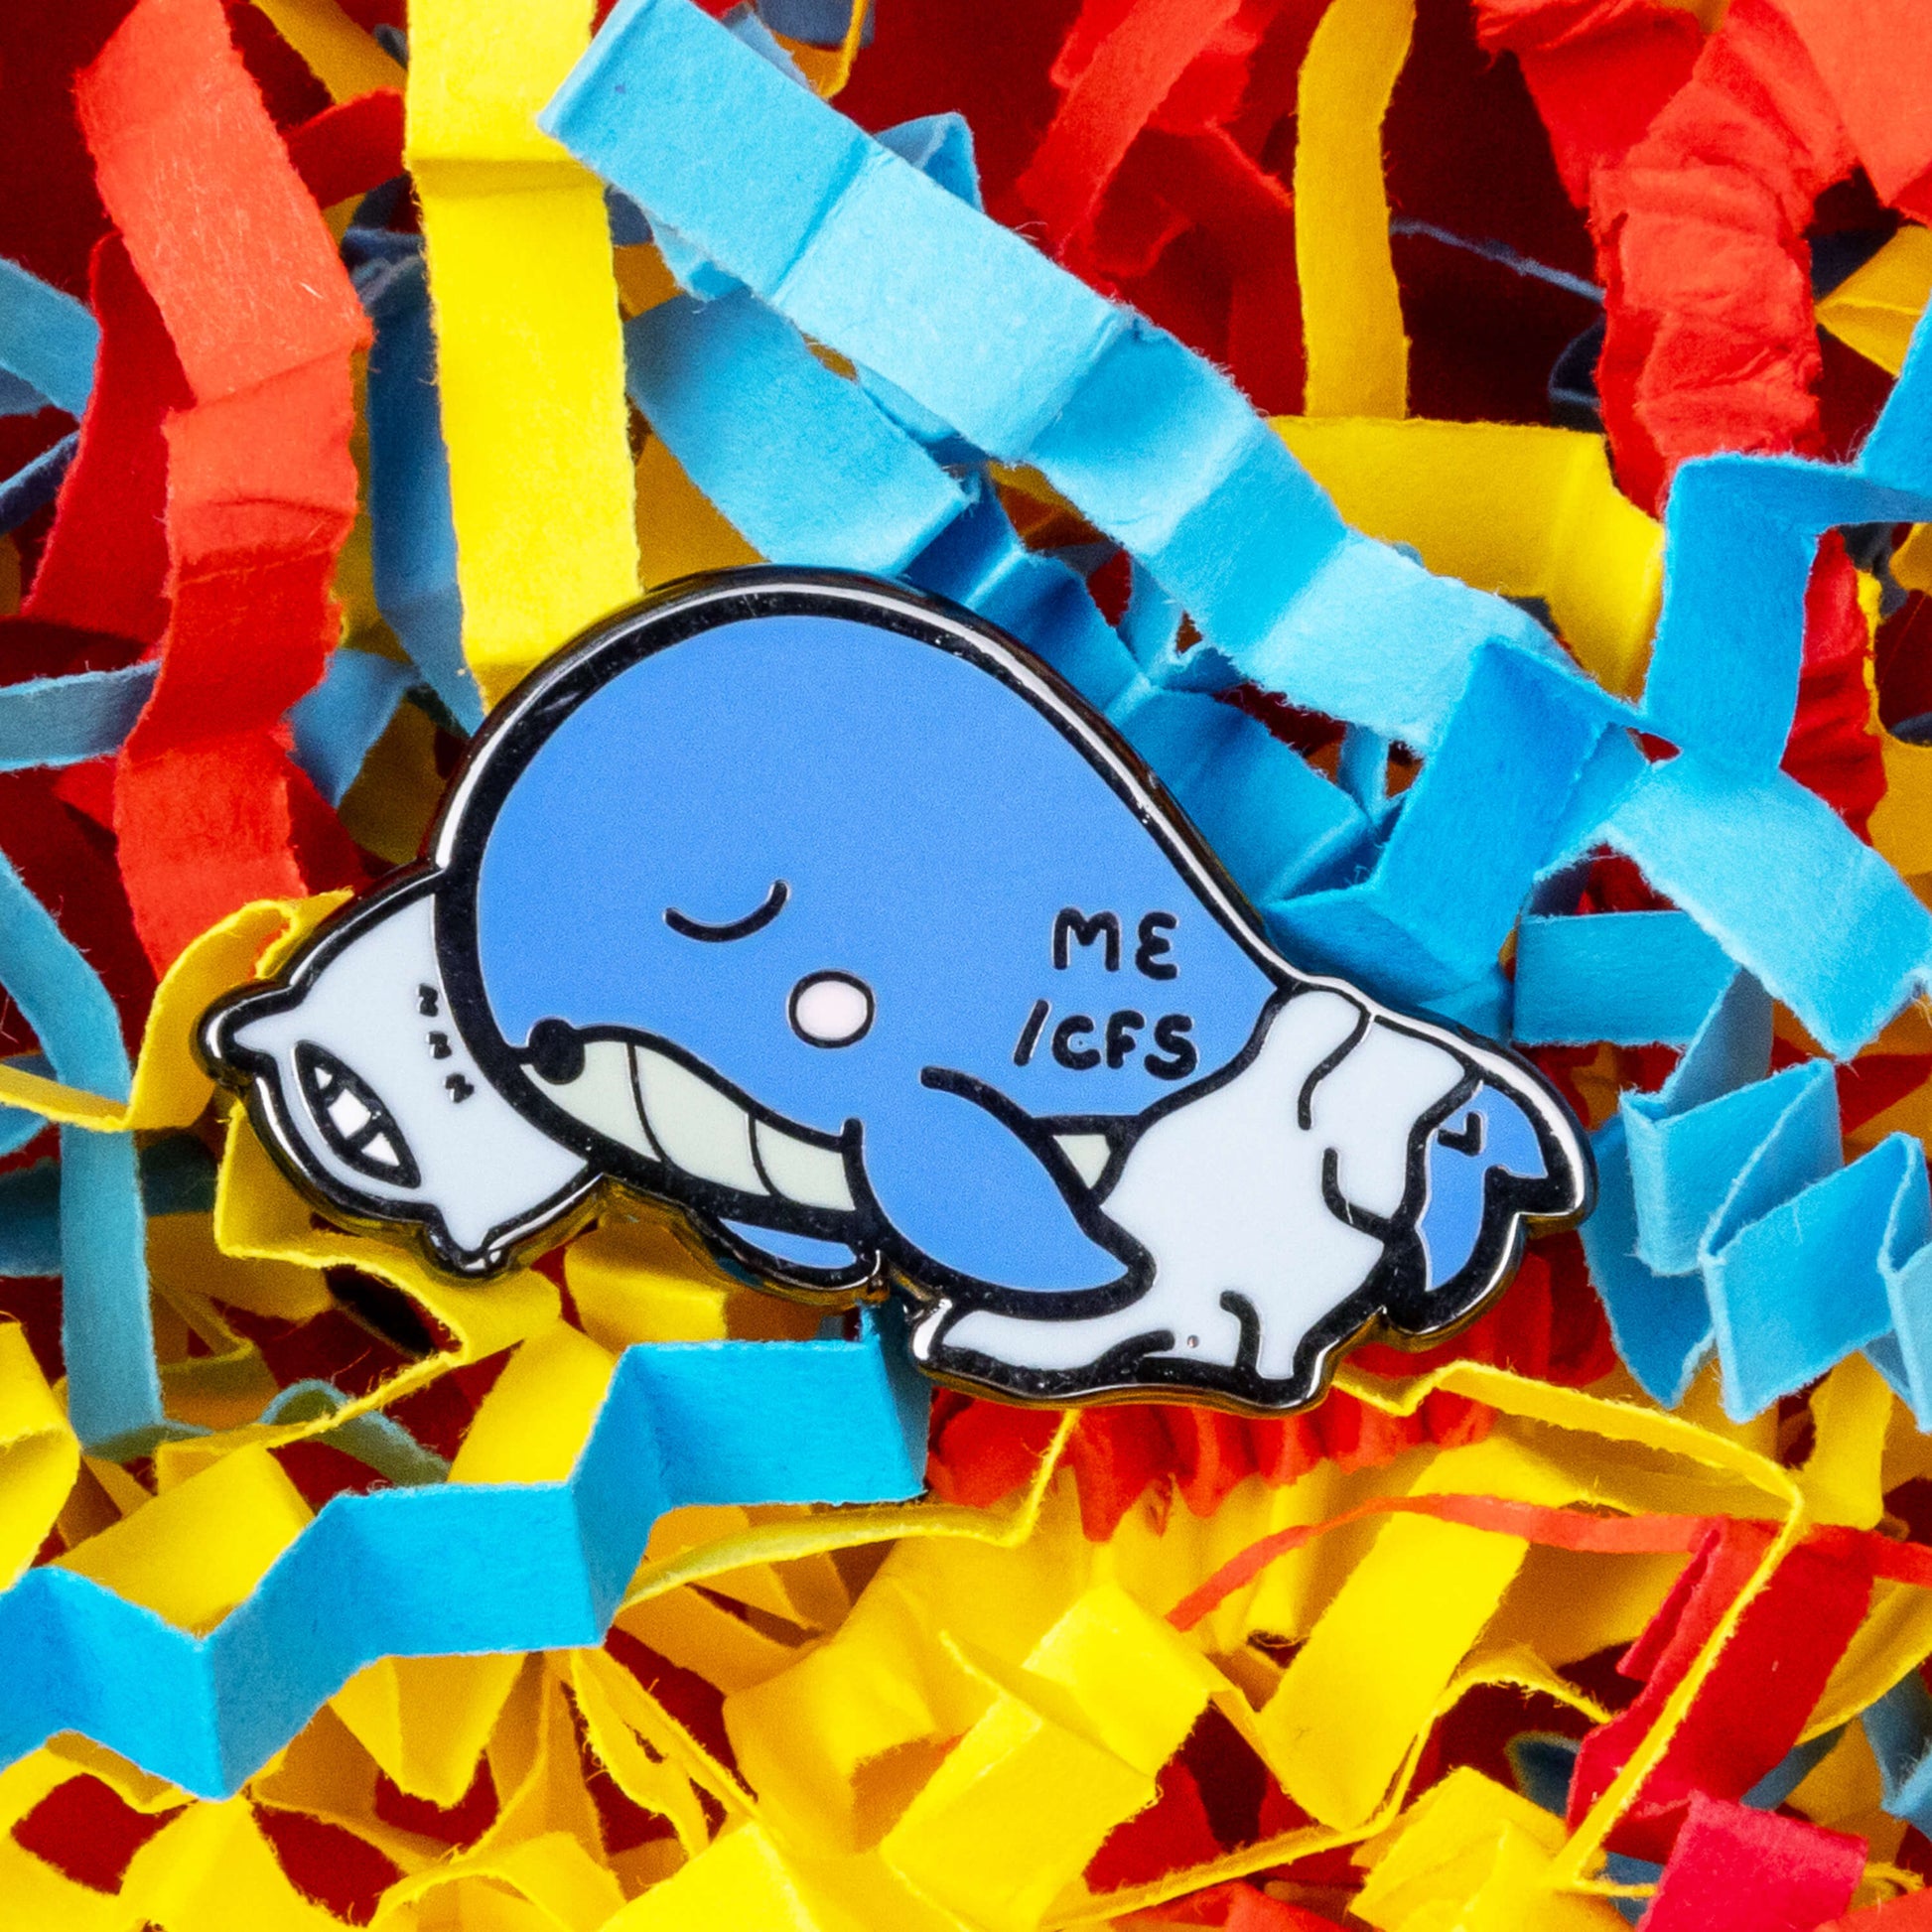 Mywhalegic Enamel Pin - Myalgic Encephalomyelitis (ME/CFS) on a blue, red and yellow card confetti background. The enamel pin is a sleeping blue whale laying on a white pillow with a white blanket over it and ME/CFS written on its back. The enamel pin is designed to raise awareness for Myalgic encephalomyelitis or chronic fatigue syndrome